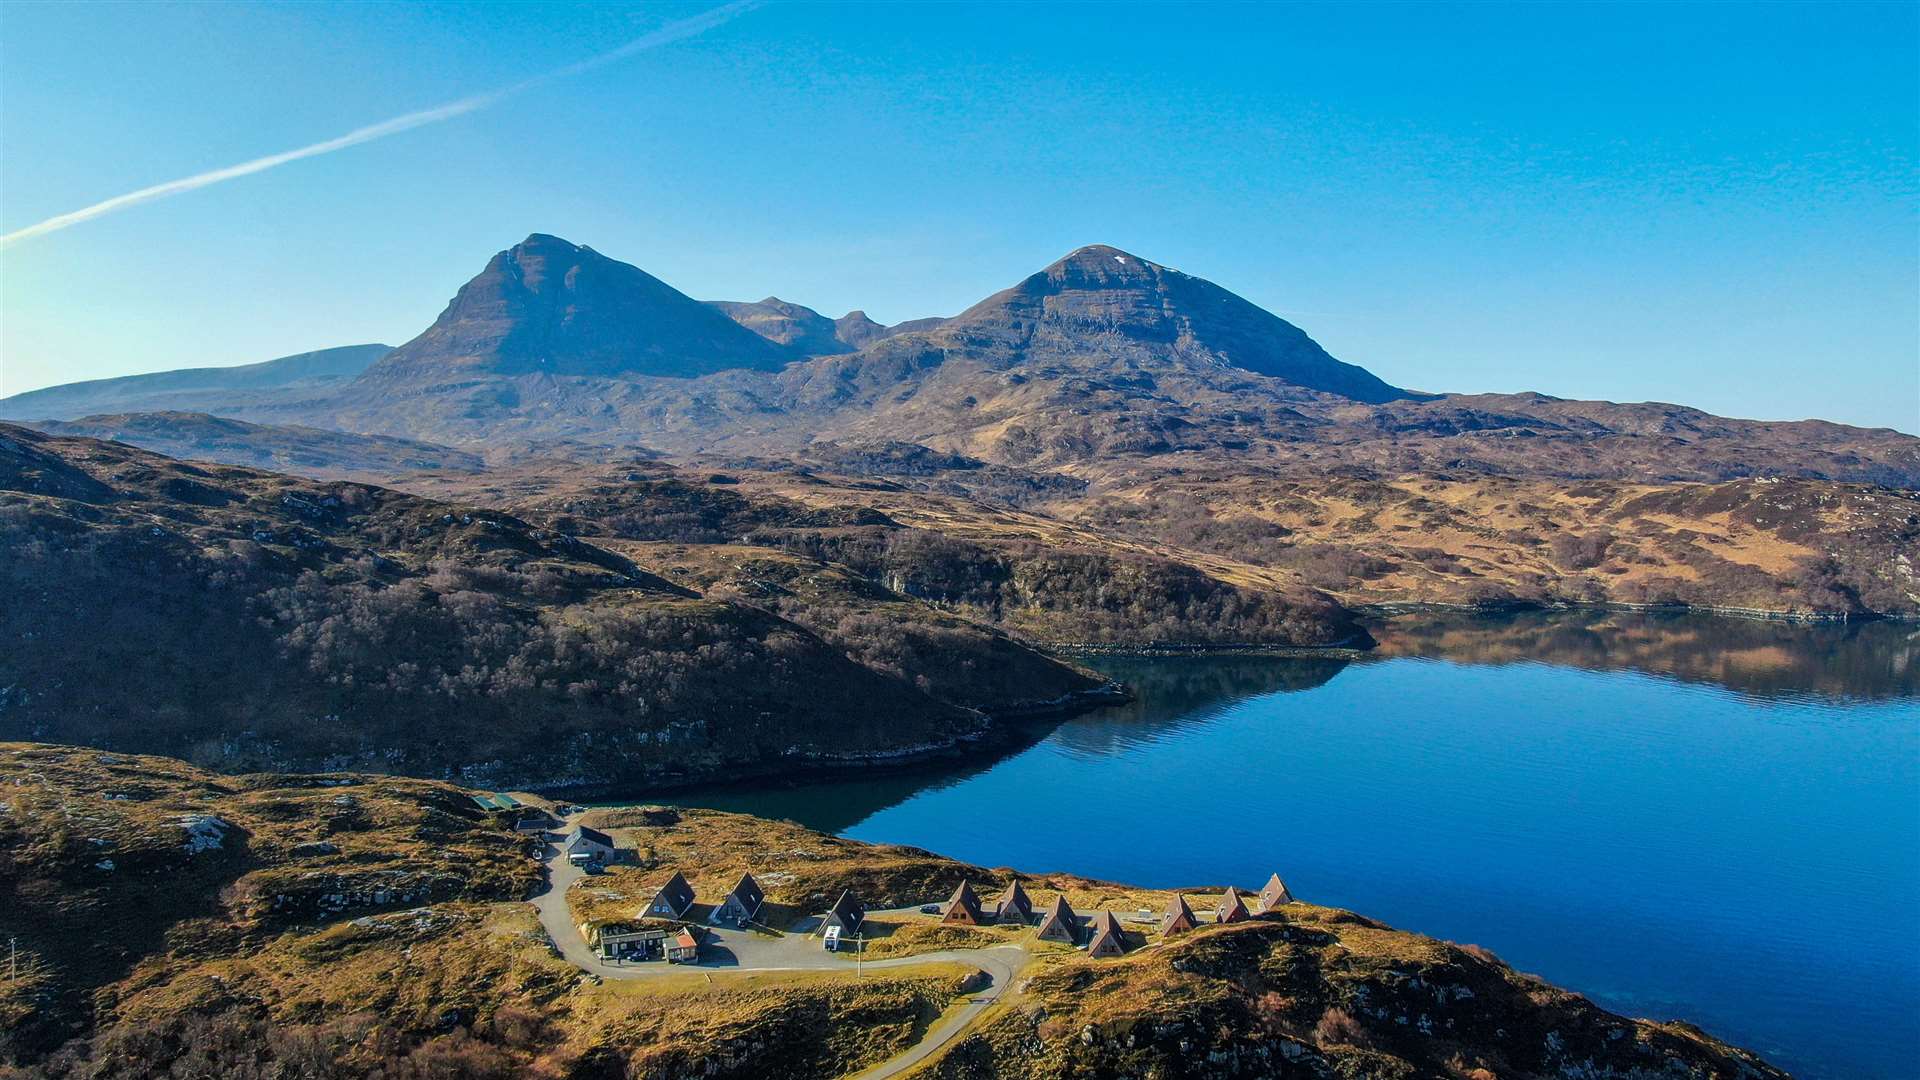 The 45-acre site at Kylesku includes visitor pods and has a view to Quinag, which is also owned by the John Muir Trust. Picture: Sean MacKay/JMT